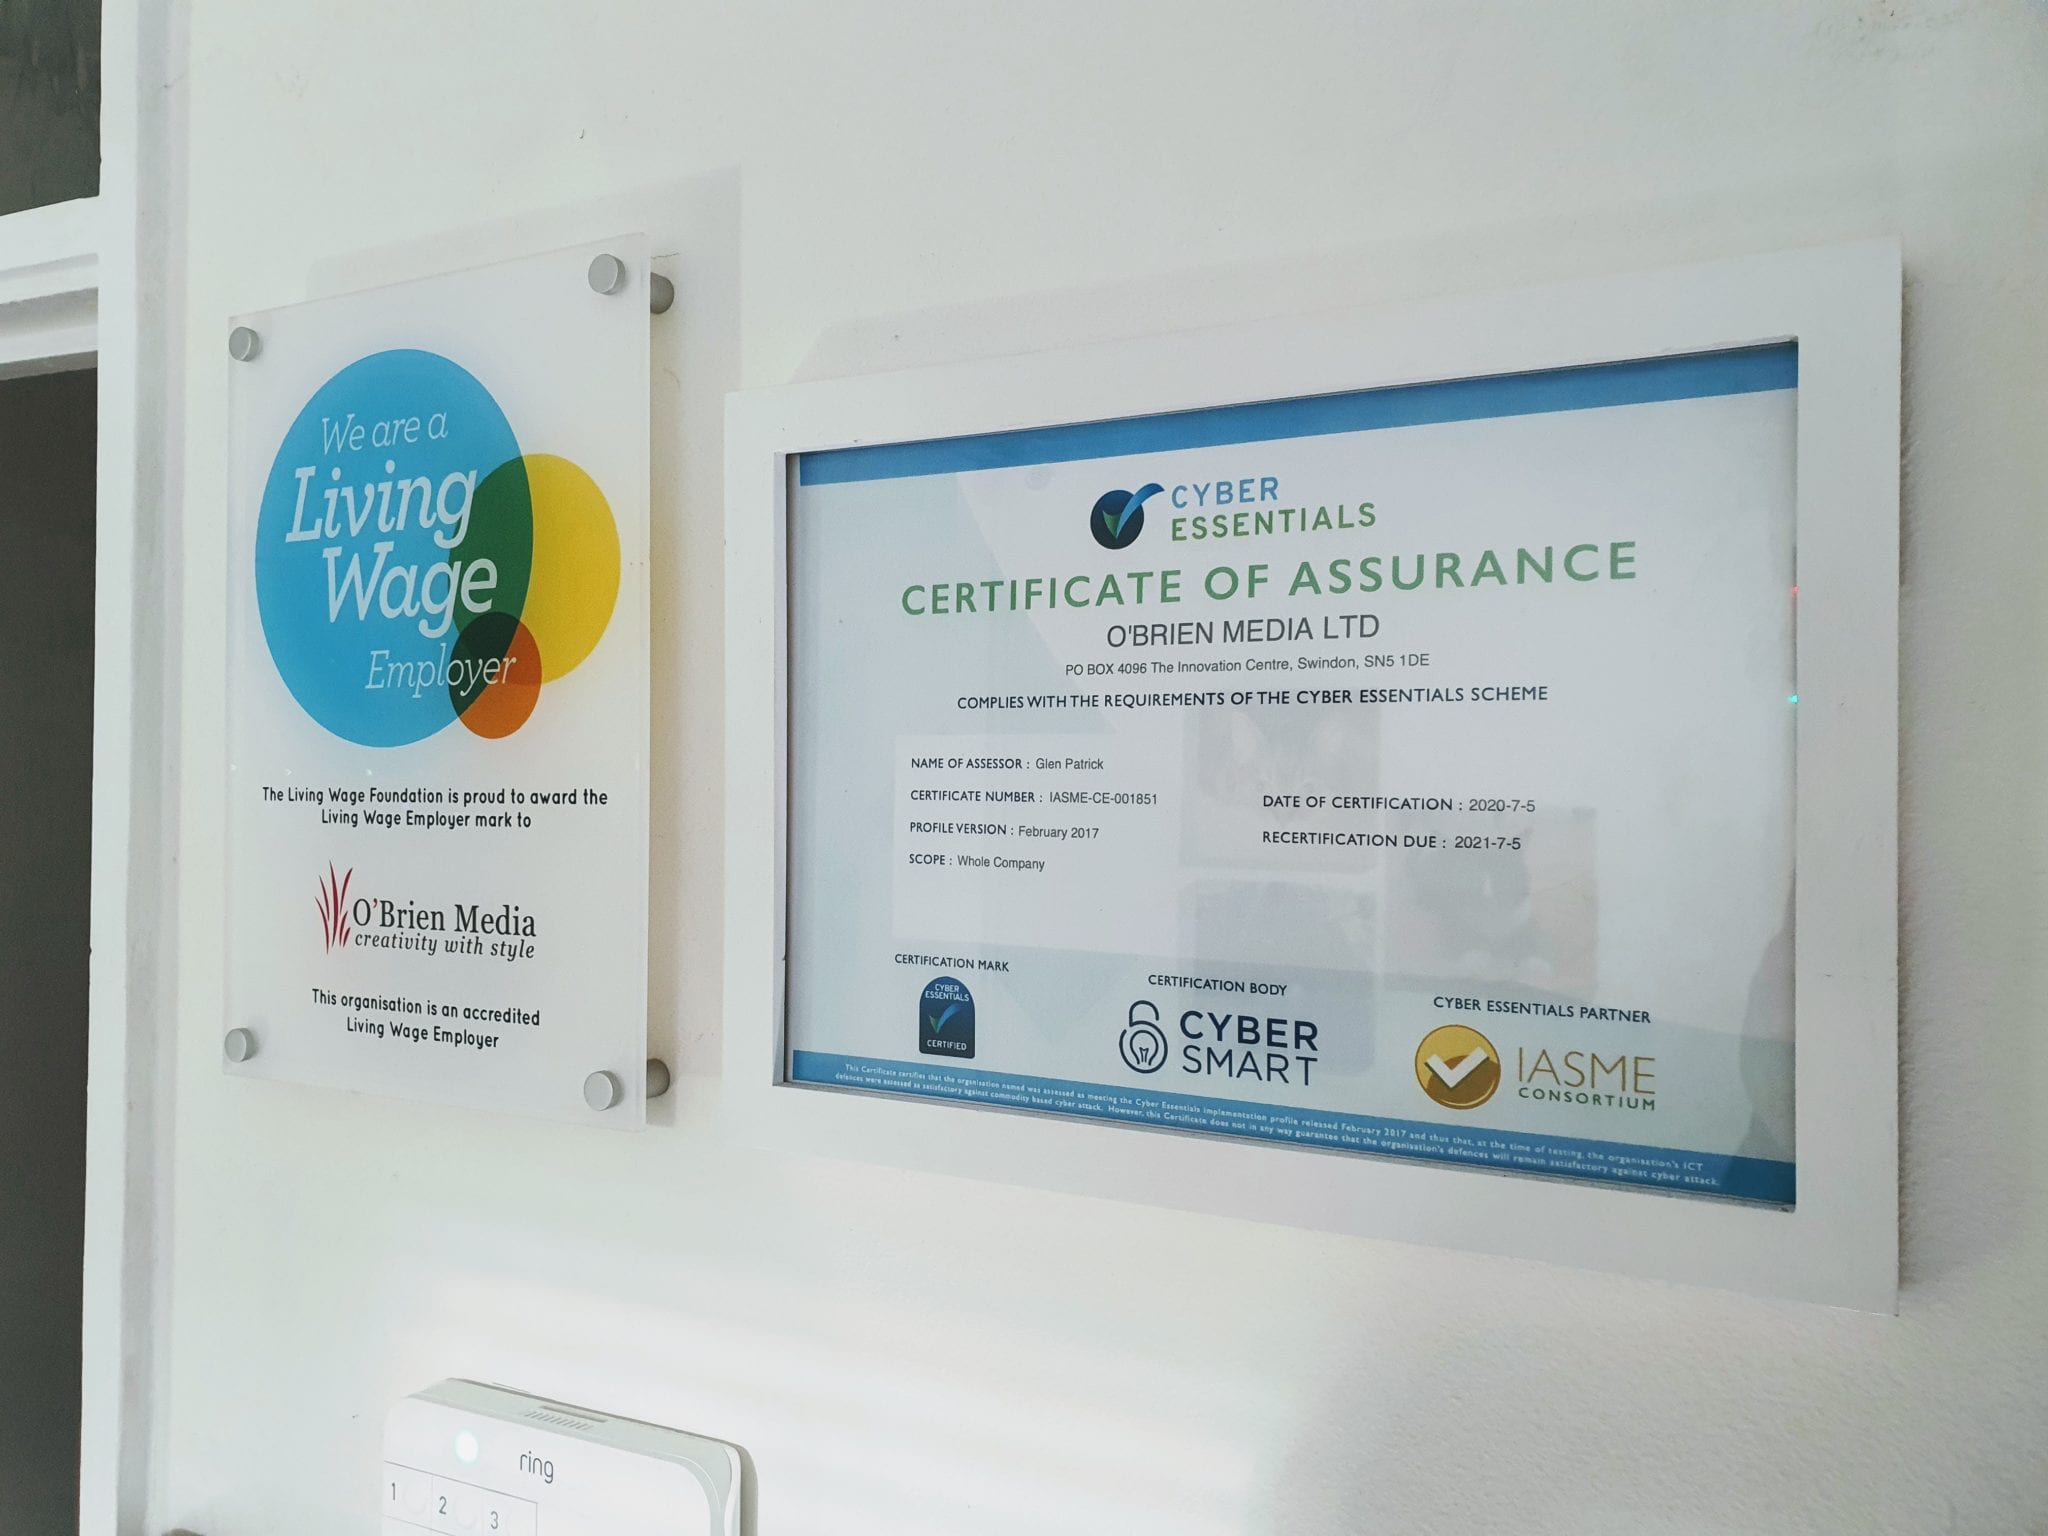 certificates of living wage and cyber essentials on a white wall